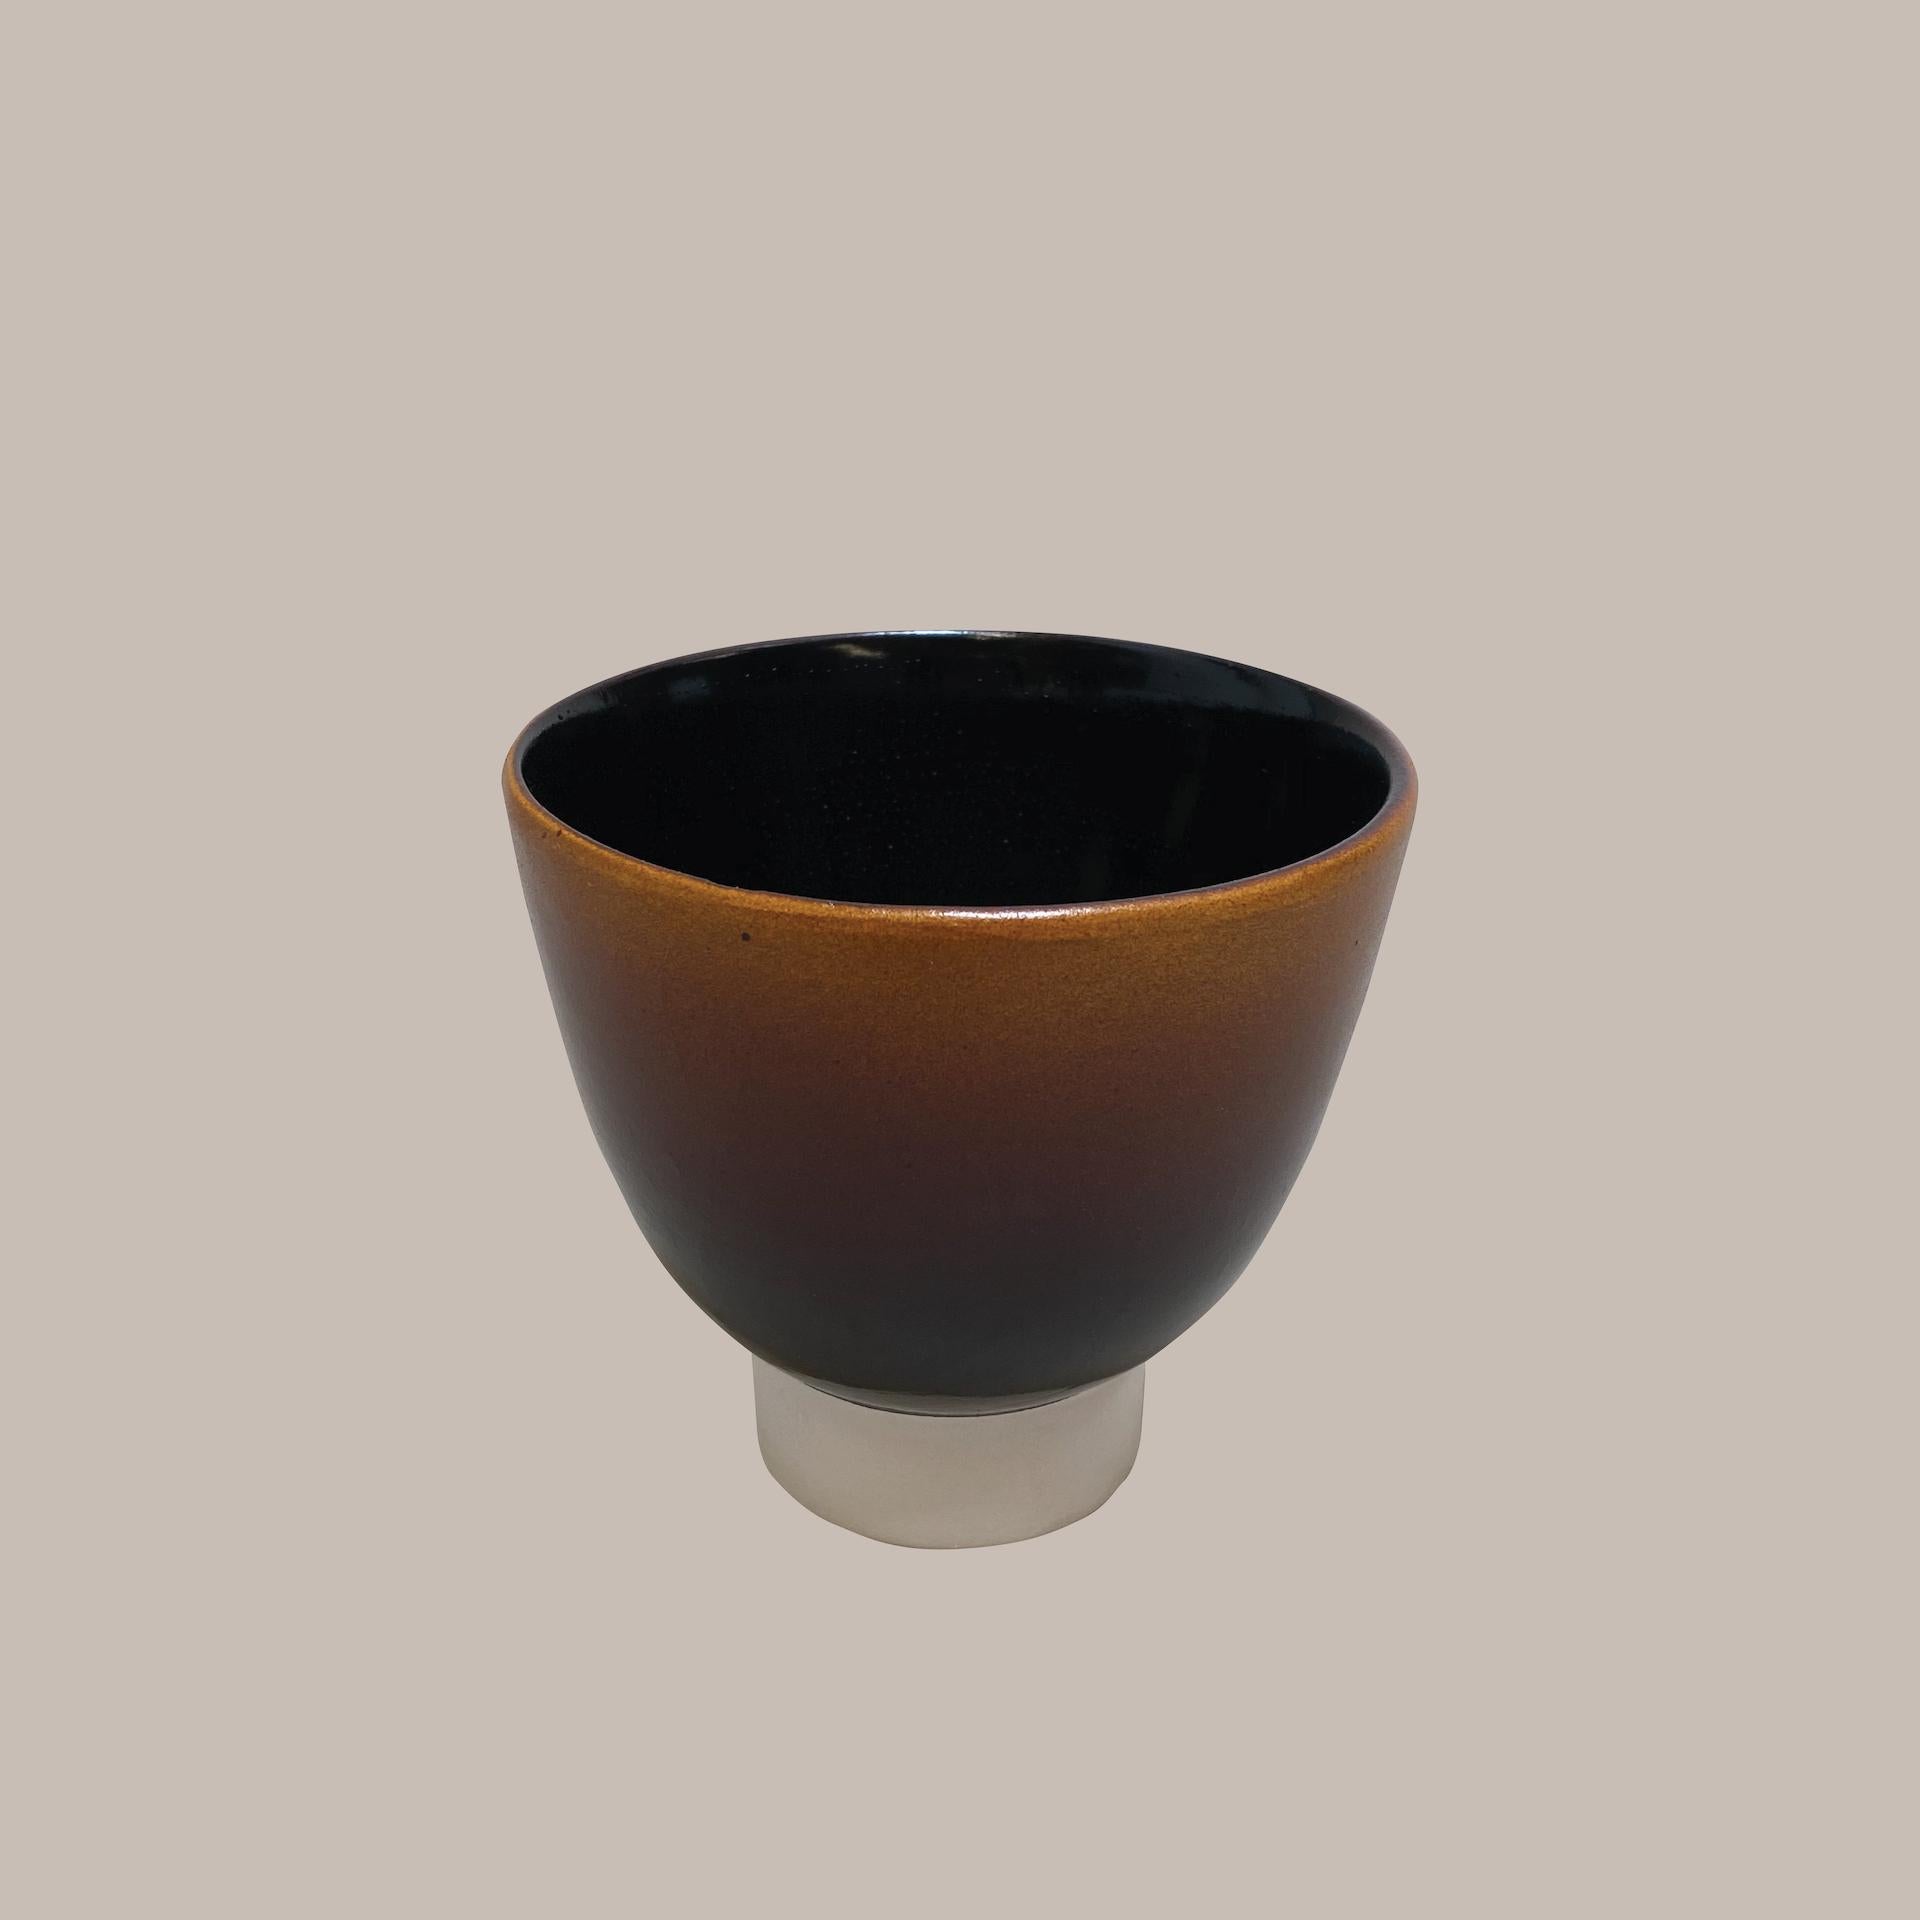 Modern Ott Another Paradigmatic Handmade Ceramic Cup by Studio Yoon Seok-Hyeon For Sale